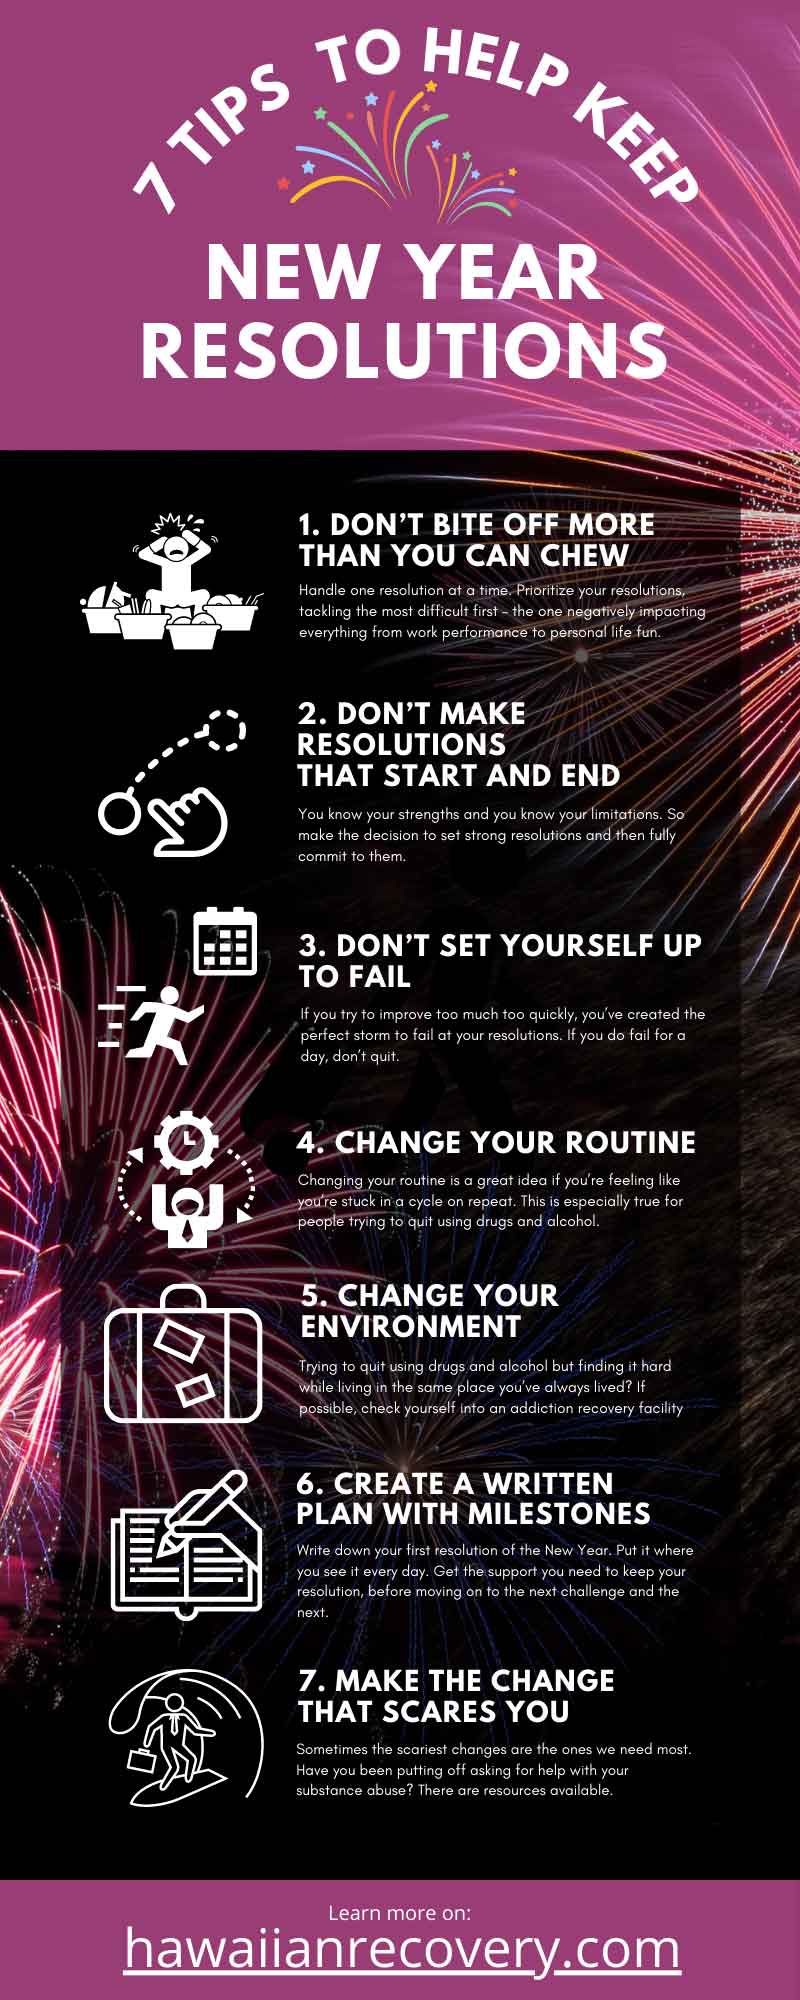 TIPS TO HELP KEEP NEW YEAR RESOLUTIONS FOR 2021